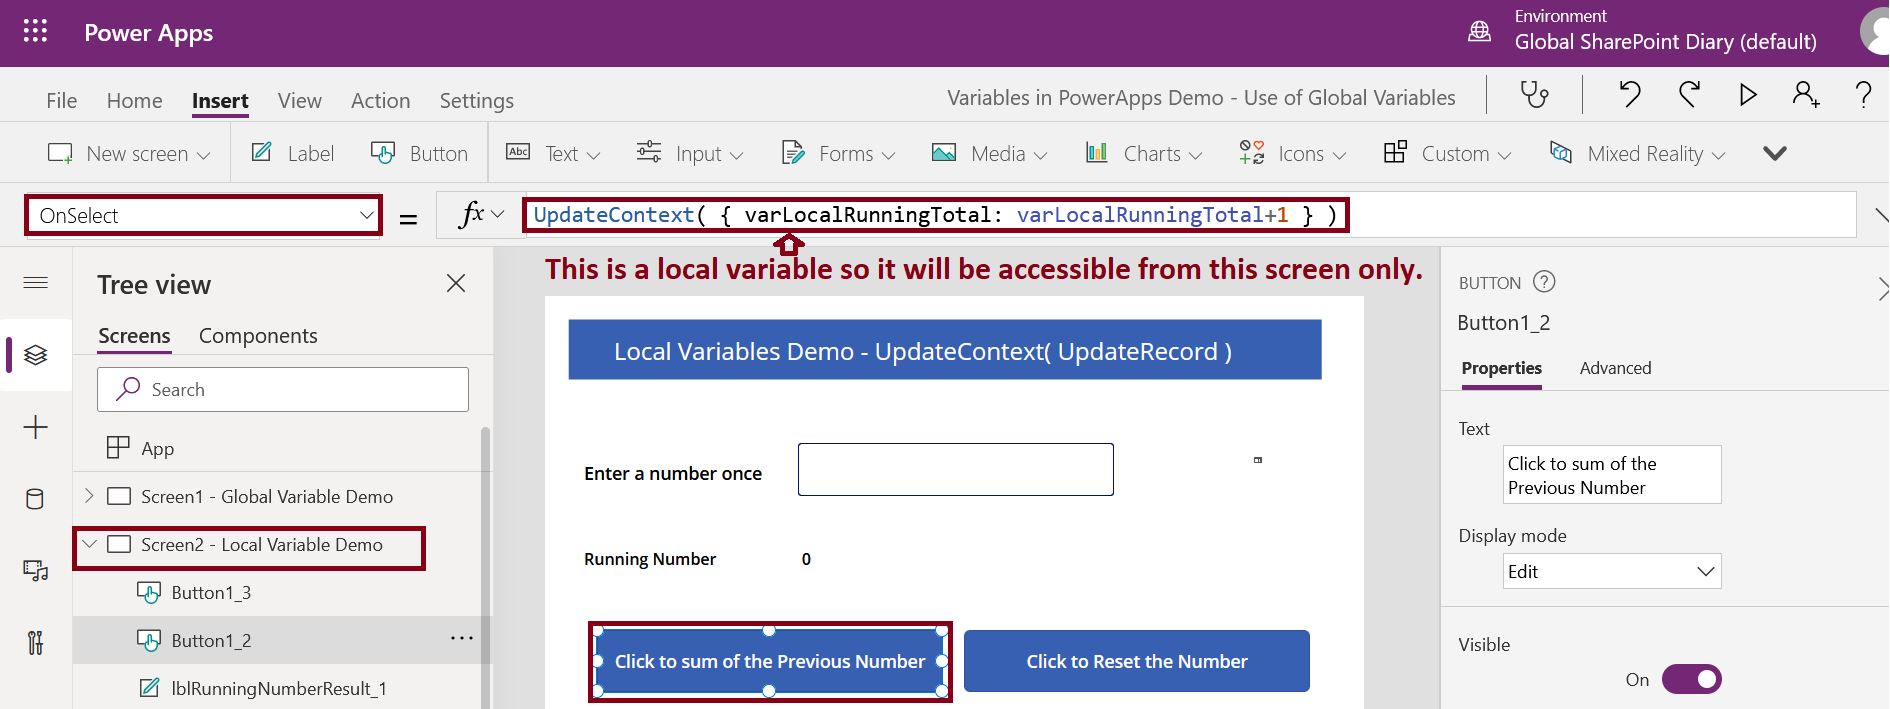 difference between Set and UpdateContext function - Auto increment counter in PowerApps